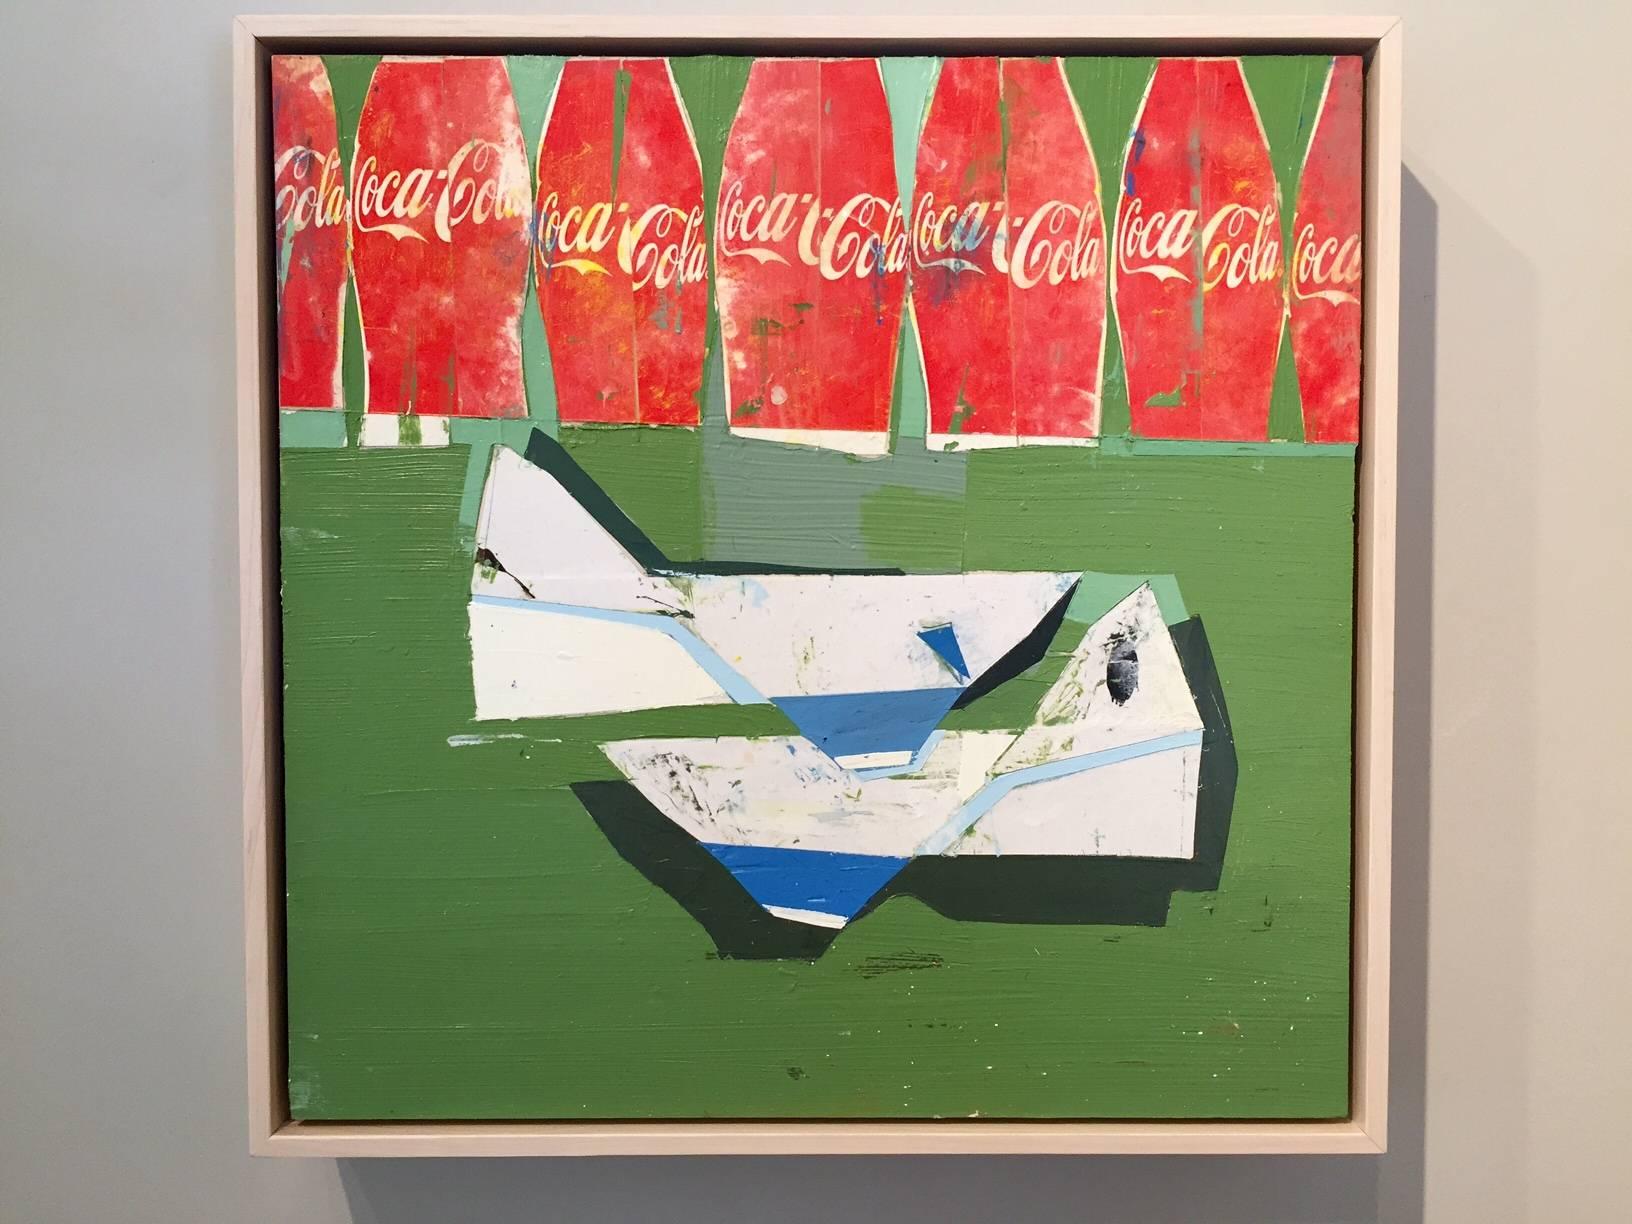 When We Were Children / Coke Work - Coca-Cola painting - Painting by Kim Frohsin